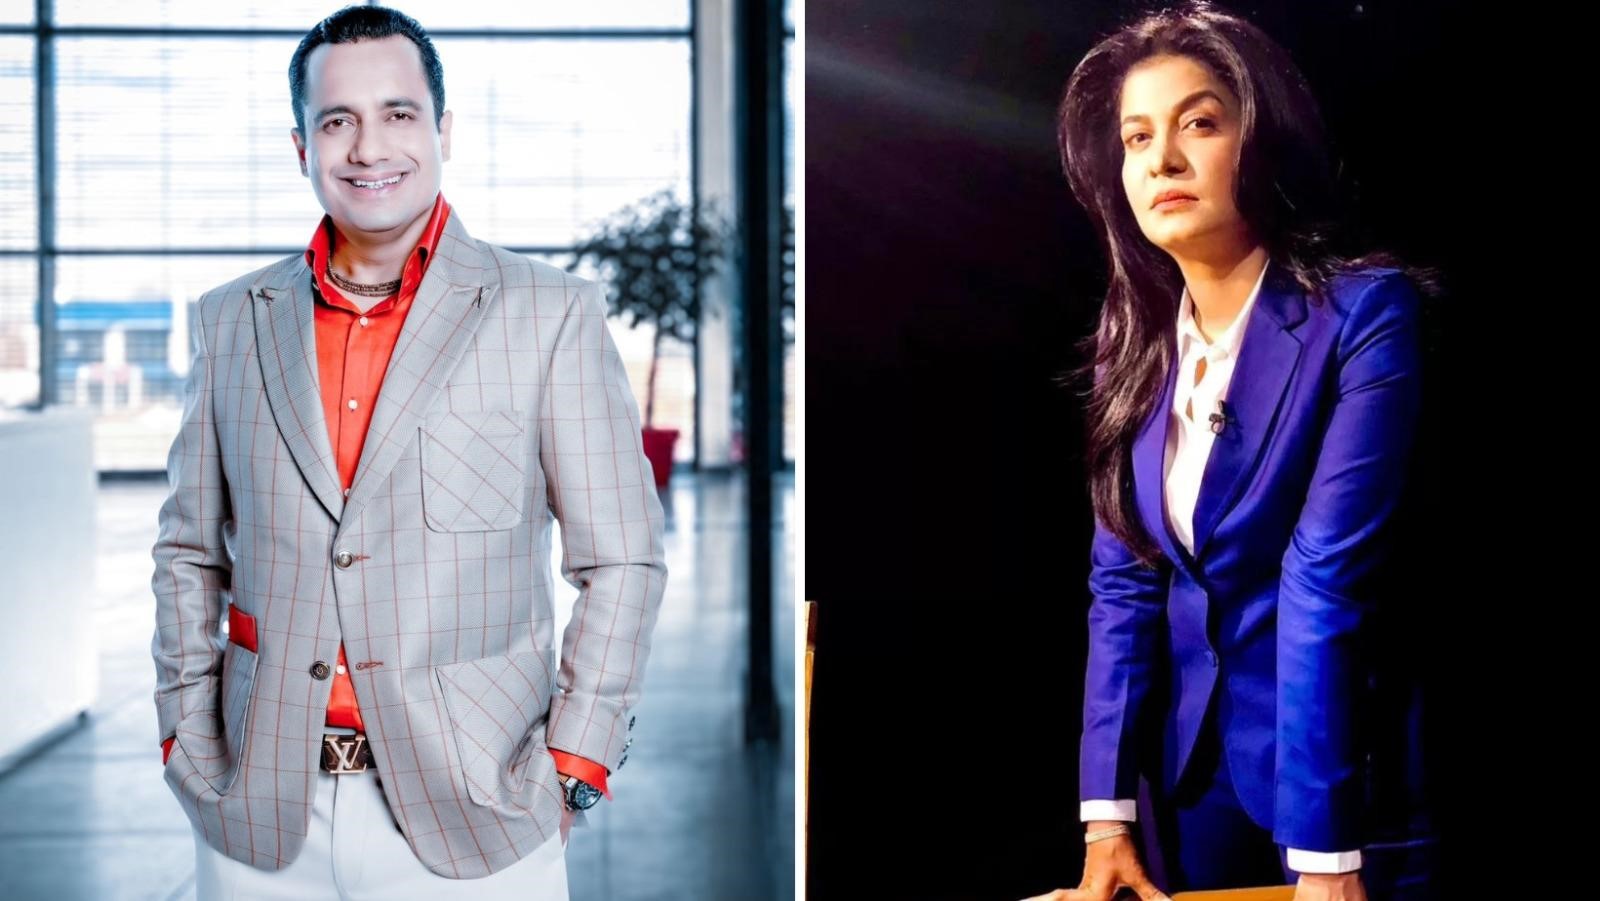 Anjana Om Kashyap’s exclusive interview with Dr. Vivek Bindra: Digging deep into the controversies surrounding the motivational speaker